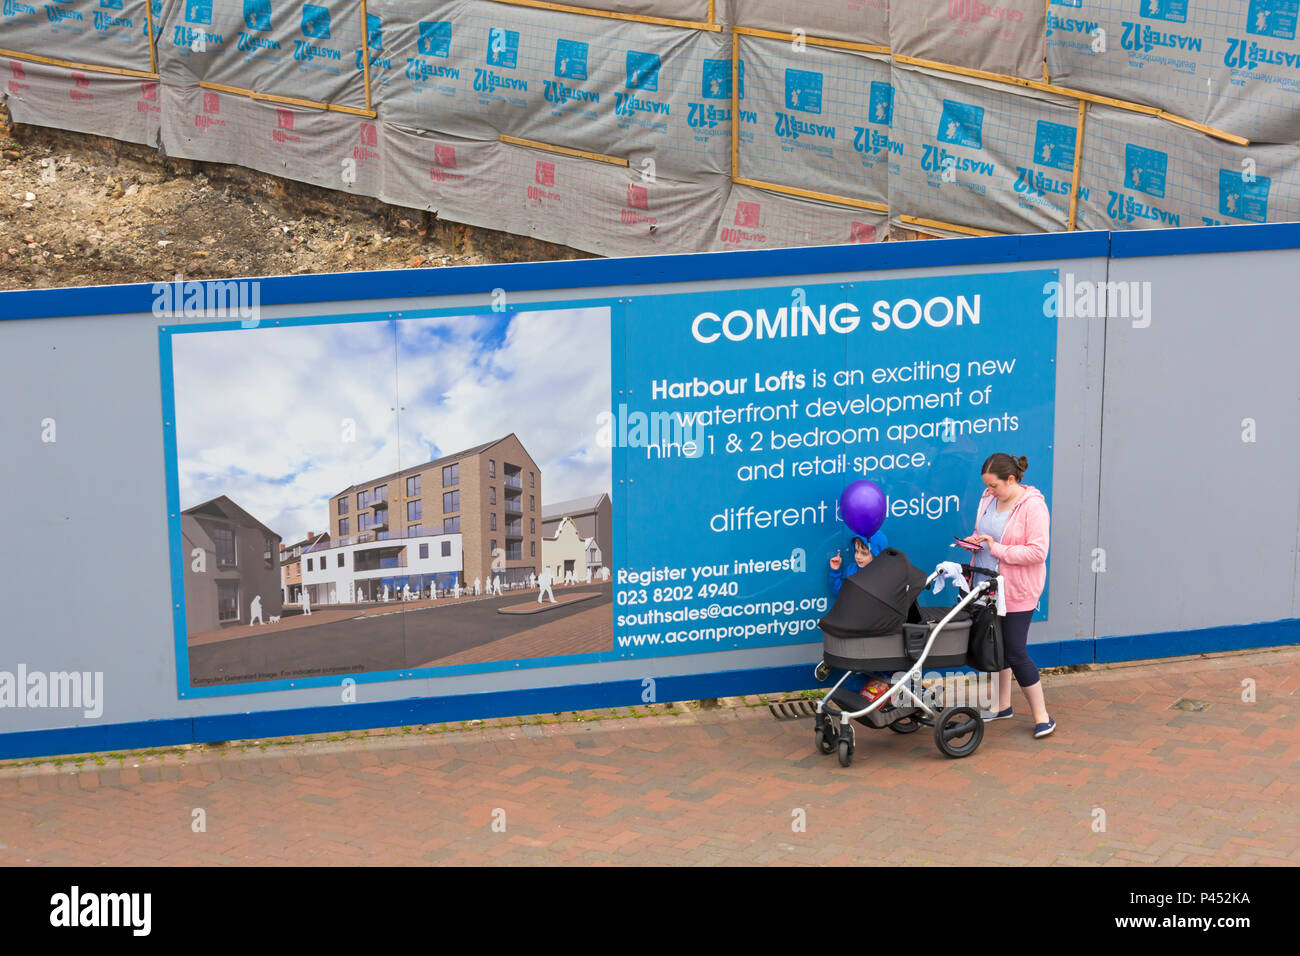 Coming soon housing development sign at Poole Quay, Dorset UK in June Stock Photo